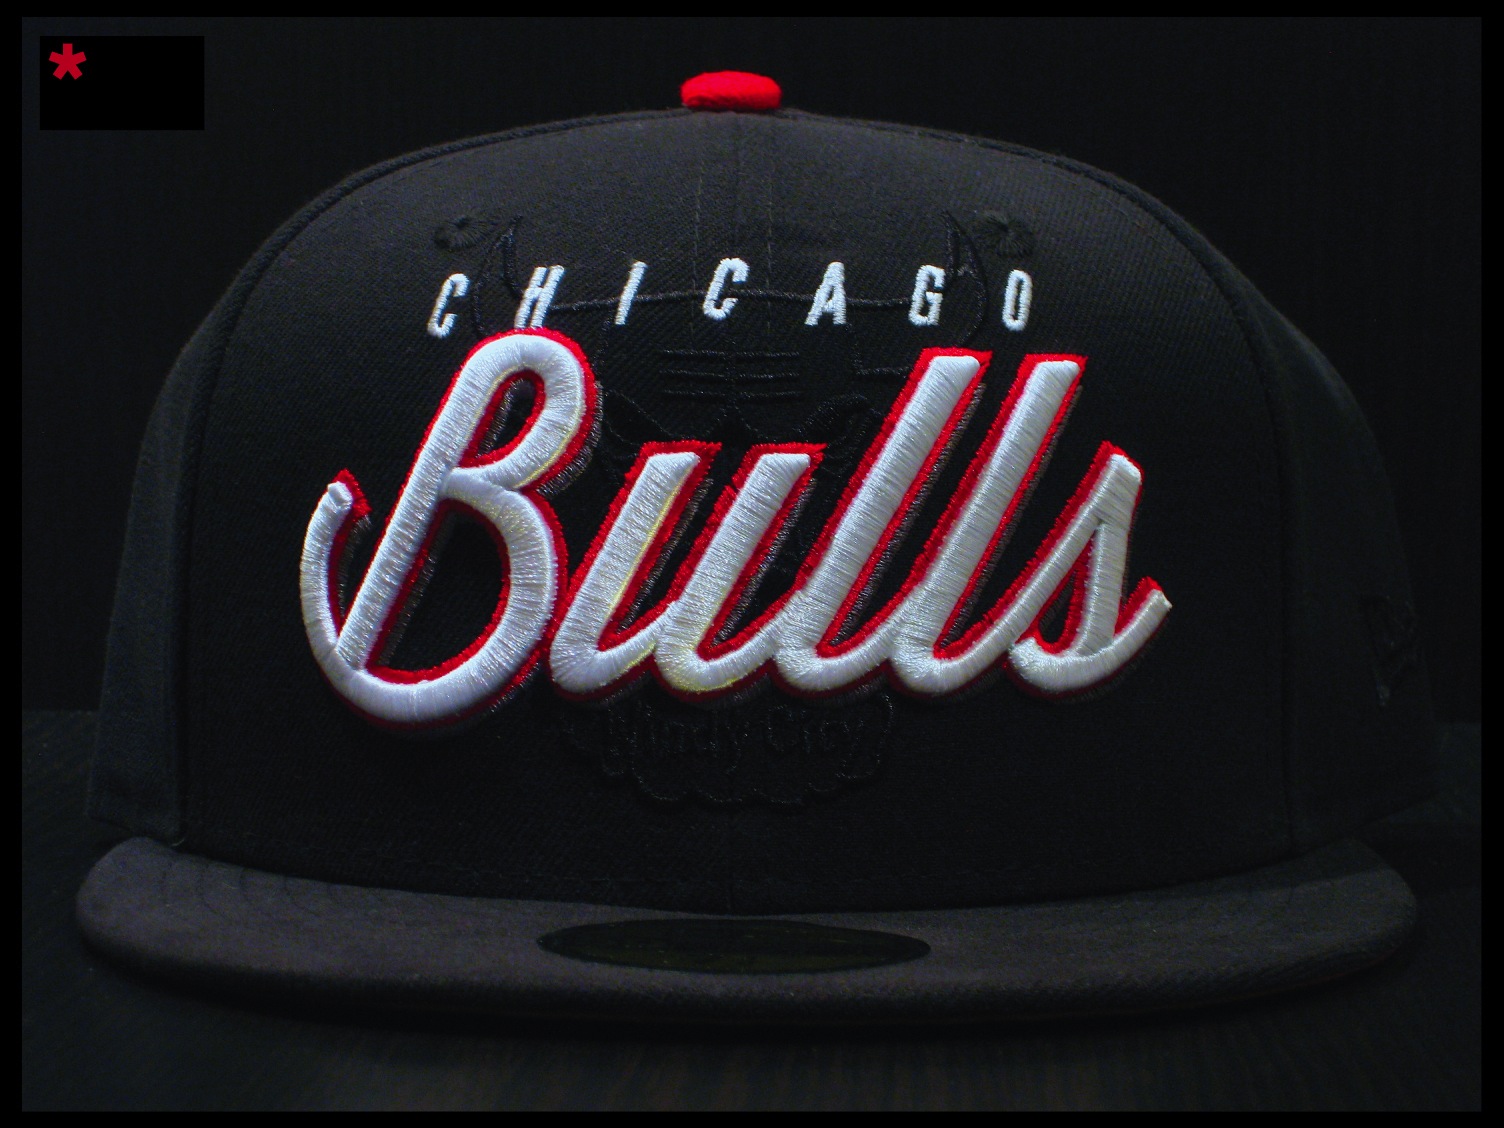 Free Download Chicago Bulls Wallpaper Windy City For